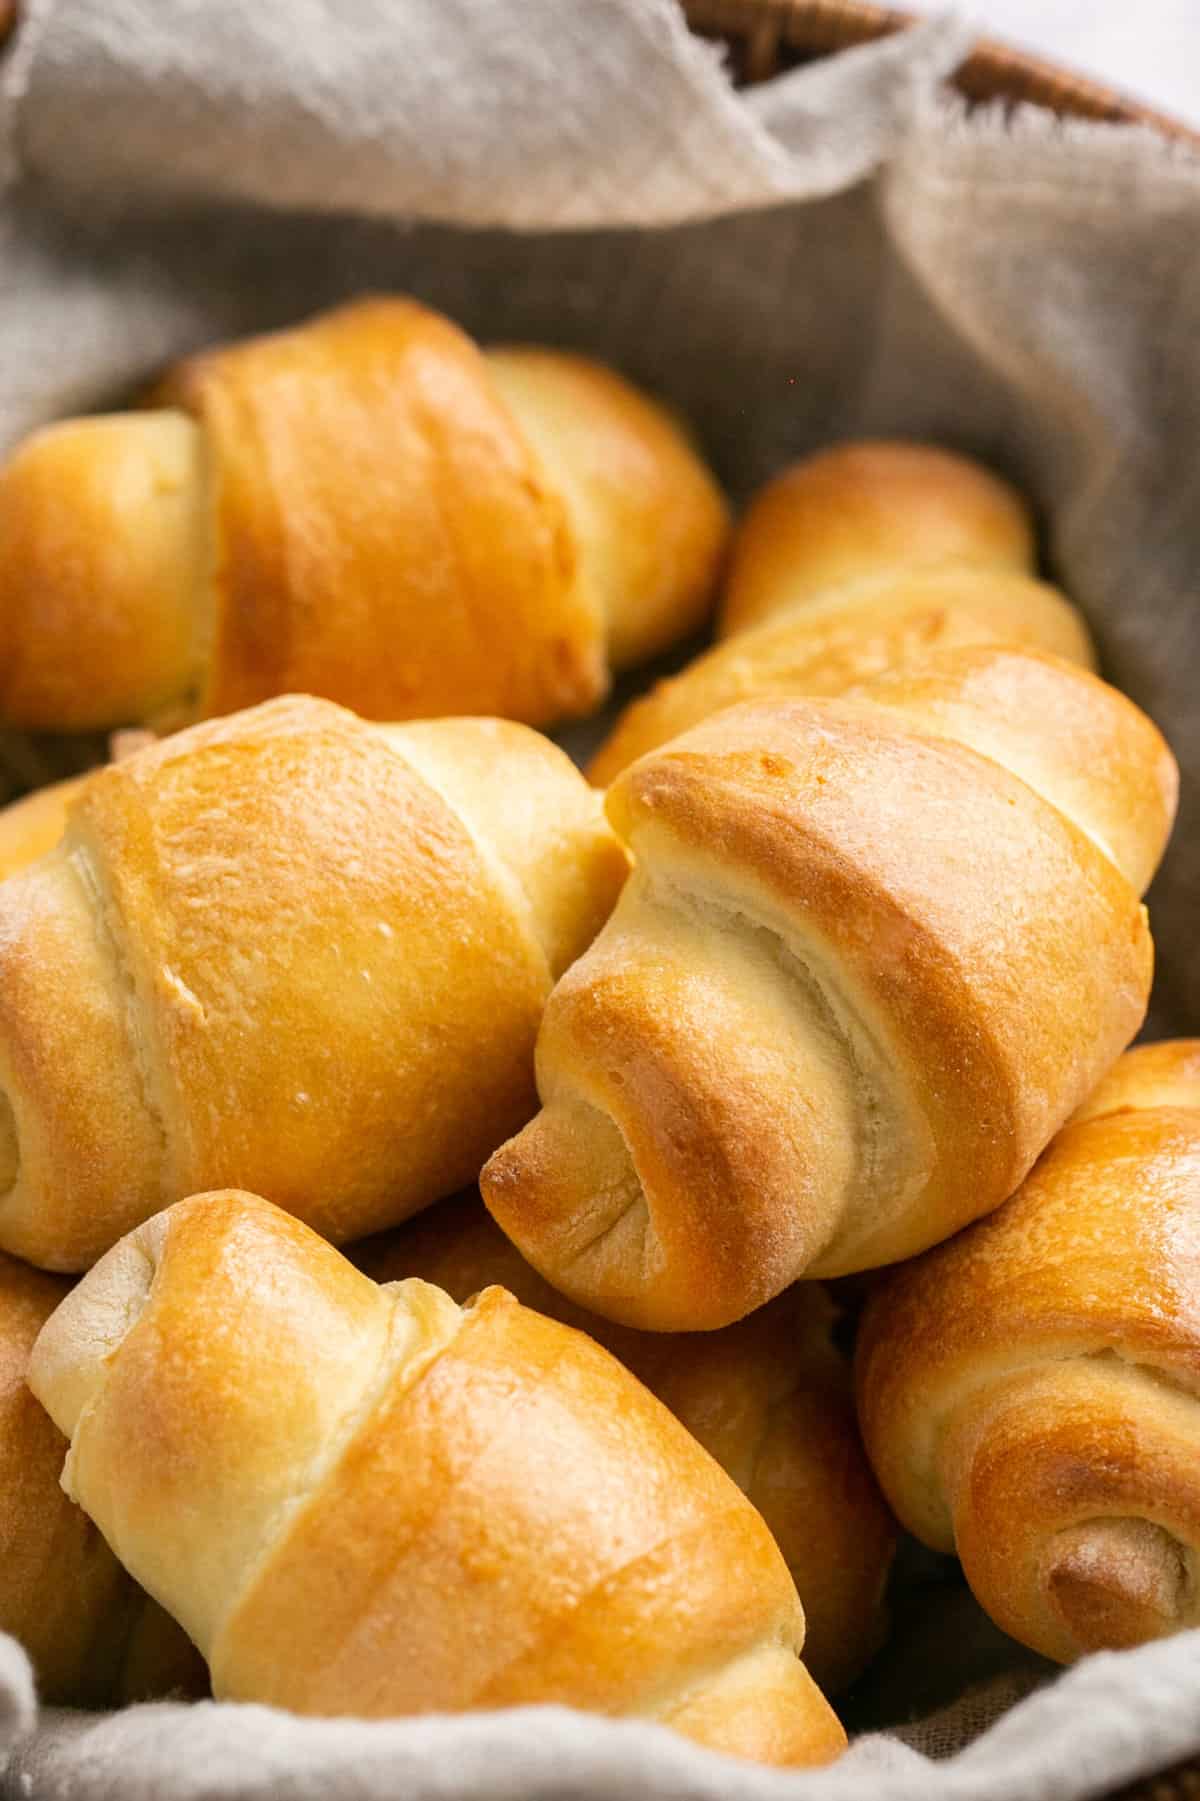 Can I Use Crescent Rolls Instead of Biscuits? You Bet!